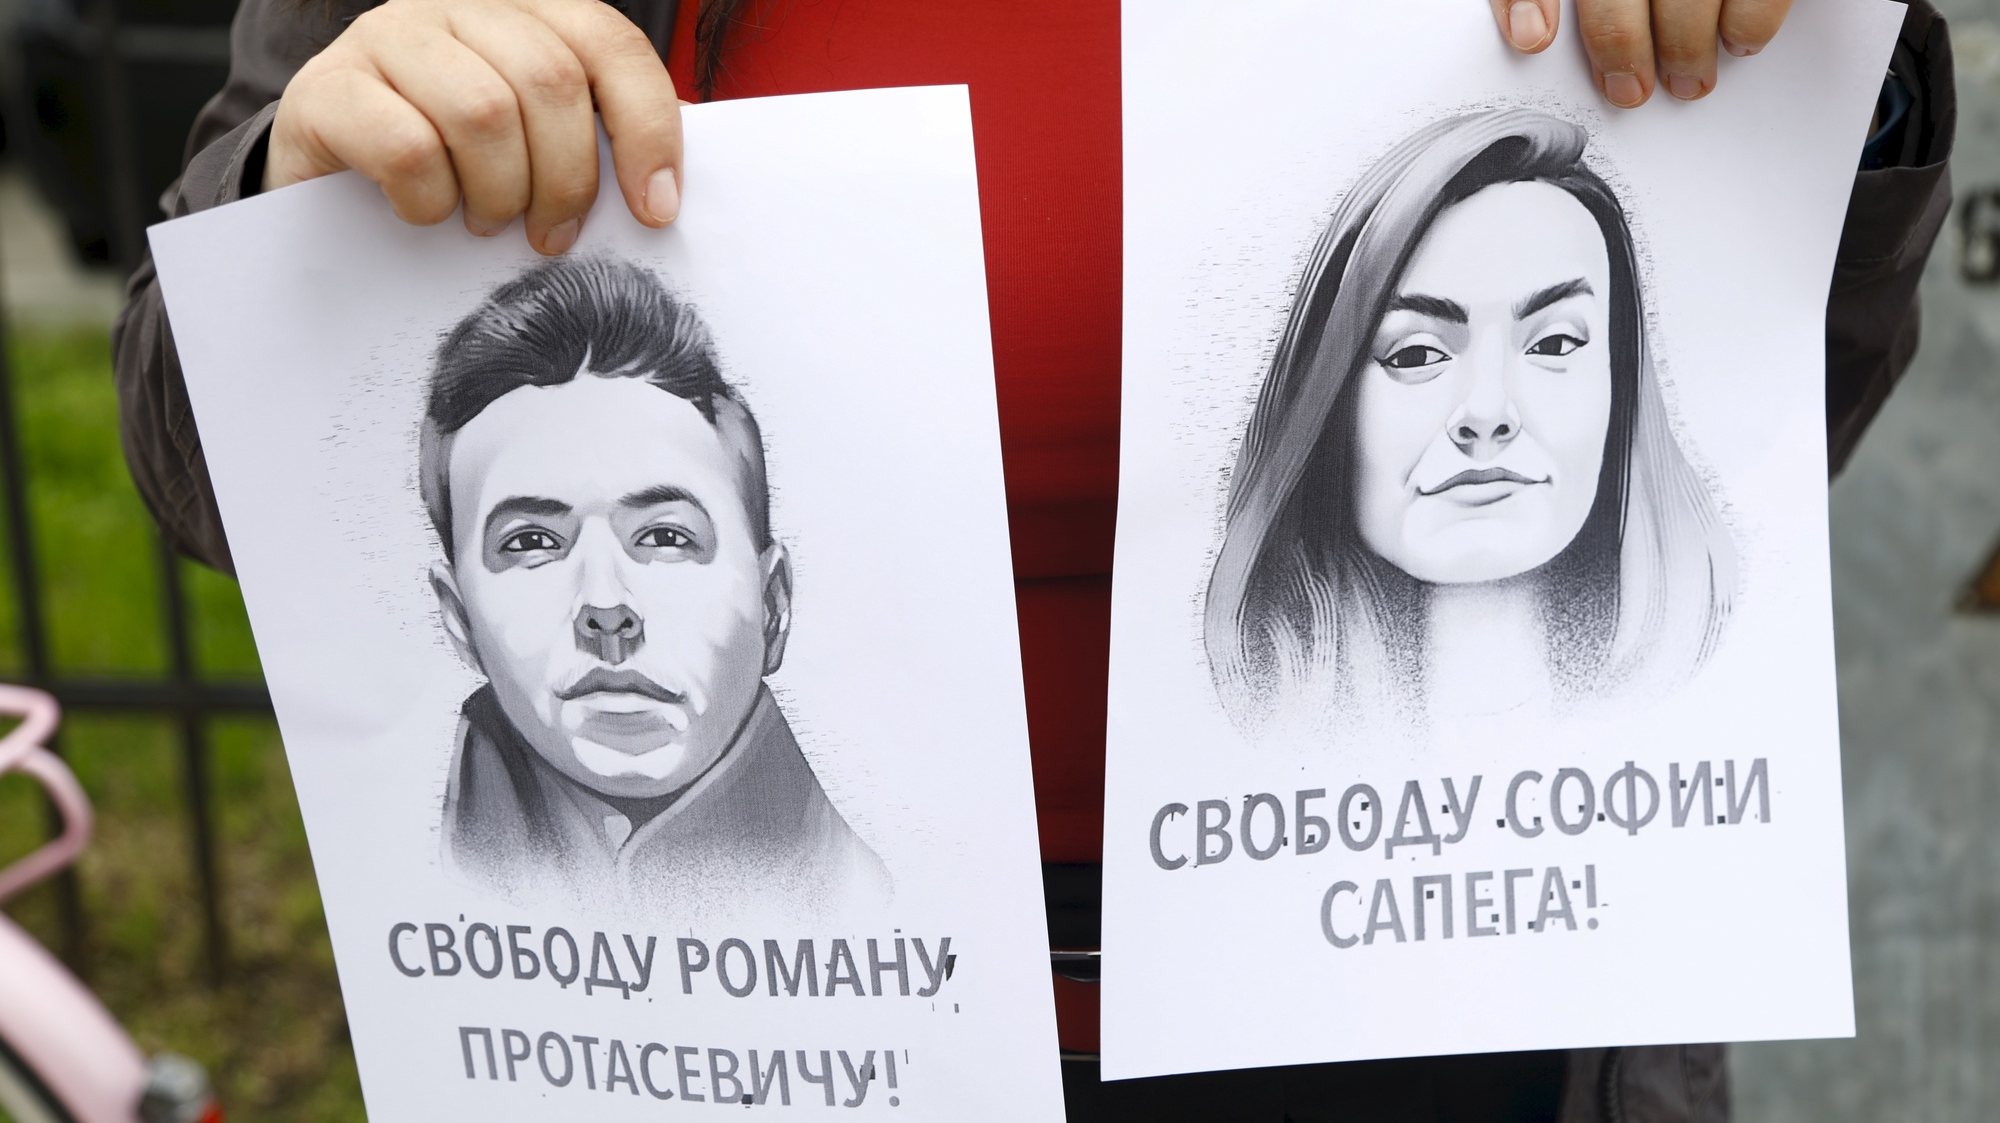 epa09226579 A woman holds a portrait of opposition journalist Roman Protasevich and his girlfriend Sofia Sapega during a protest of solidarity with Roman Protasevic at the Belarusian embassy in Riga, Latvia, 25 May 2021. Belarus&#039; opposition journalist Roman Protasevich was detained by Belarusian Police on 23 May on a Ryanair flight from Athens to Vilnius, that was forced to land in Minsk.  EPA/TOMS KALNINS